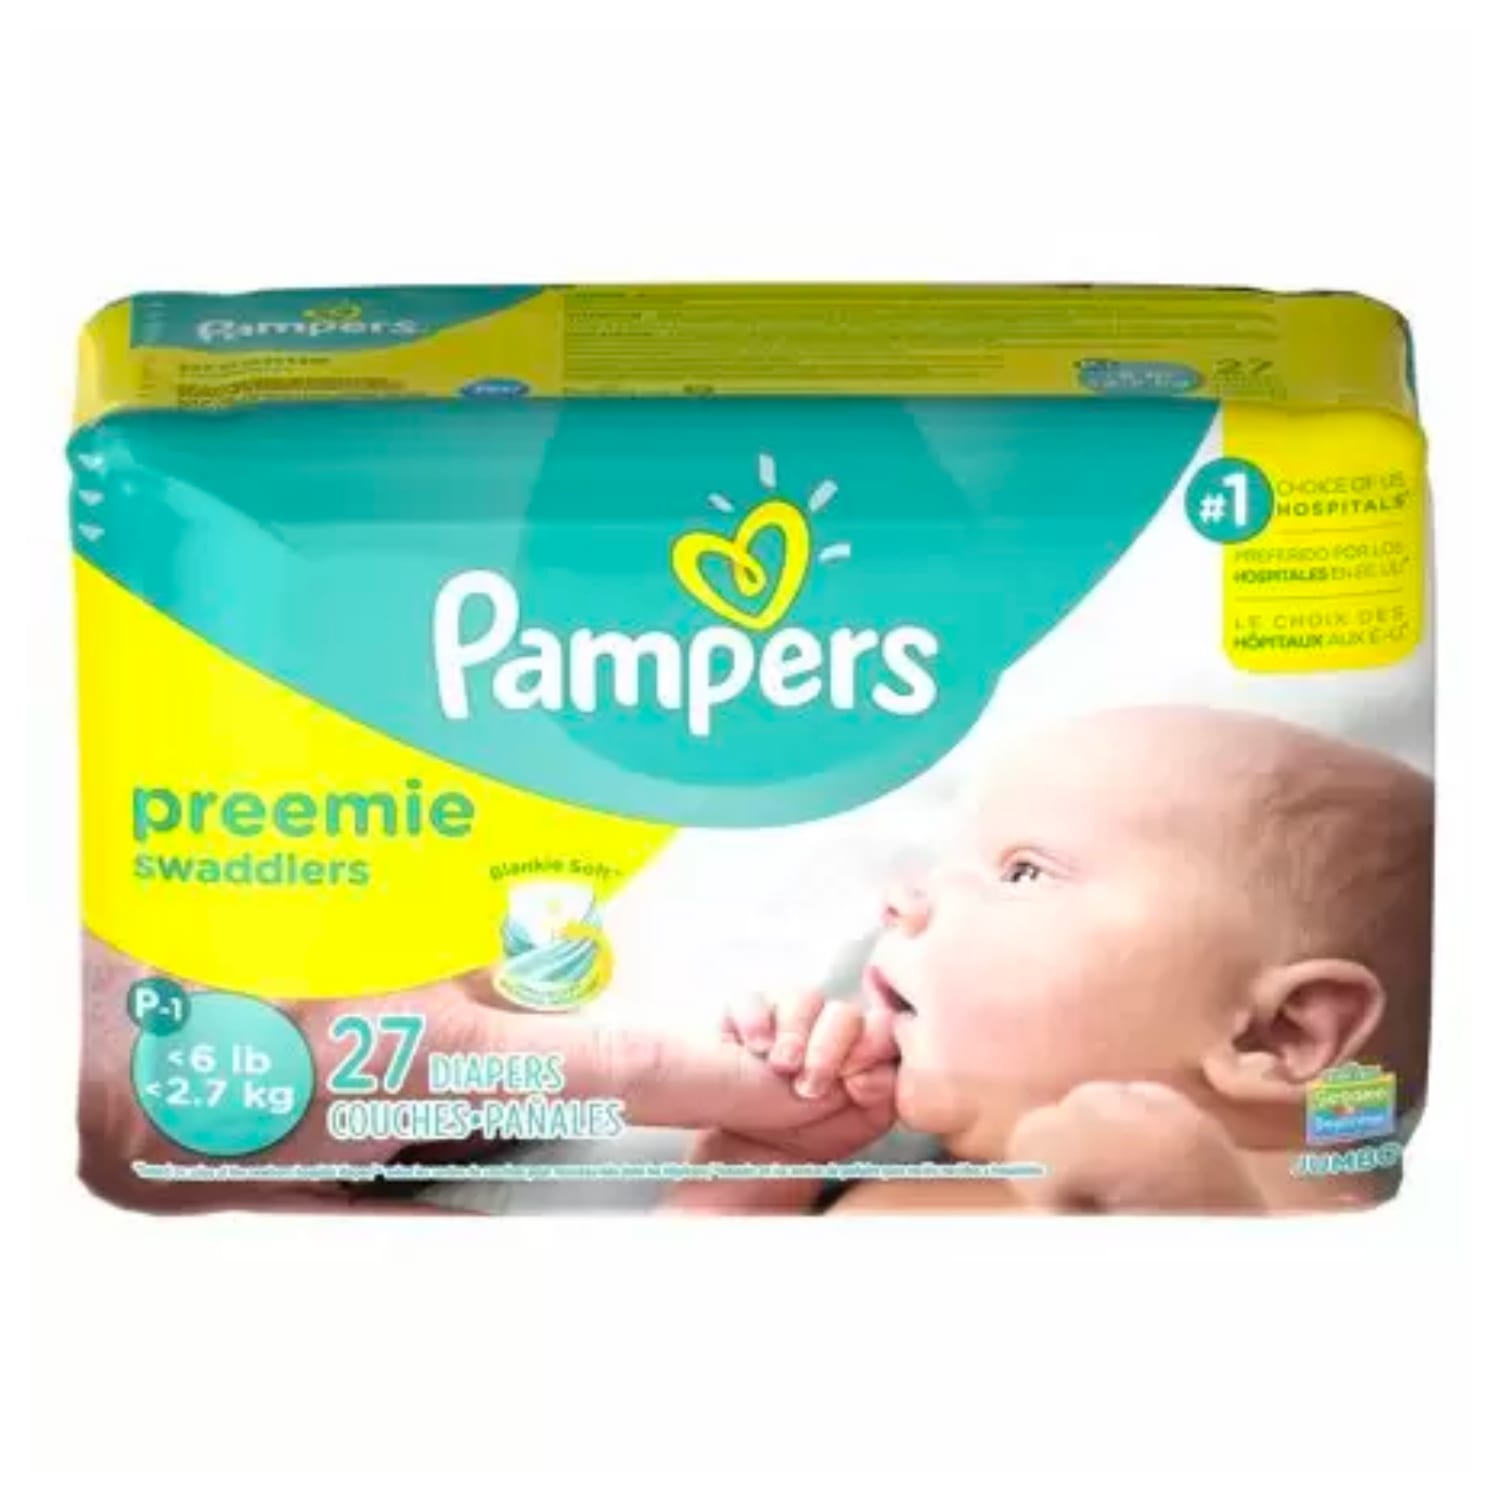 Pampers Diapers Swaddlers Jumbo Pack Size Preemie 27 Count - Voilà Online  Groceries & Offers